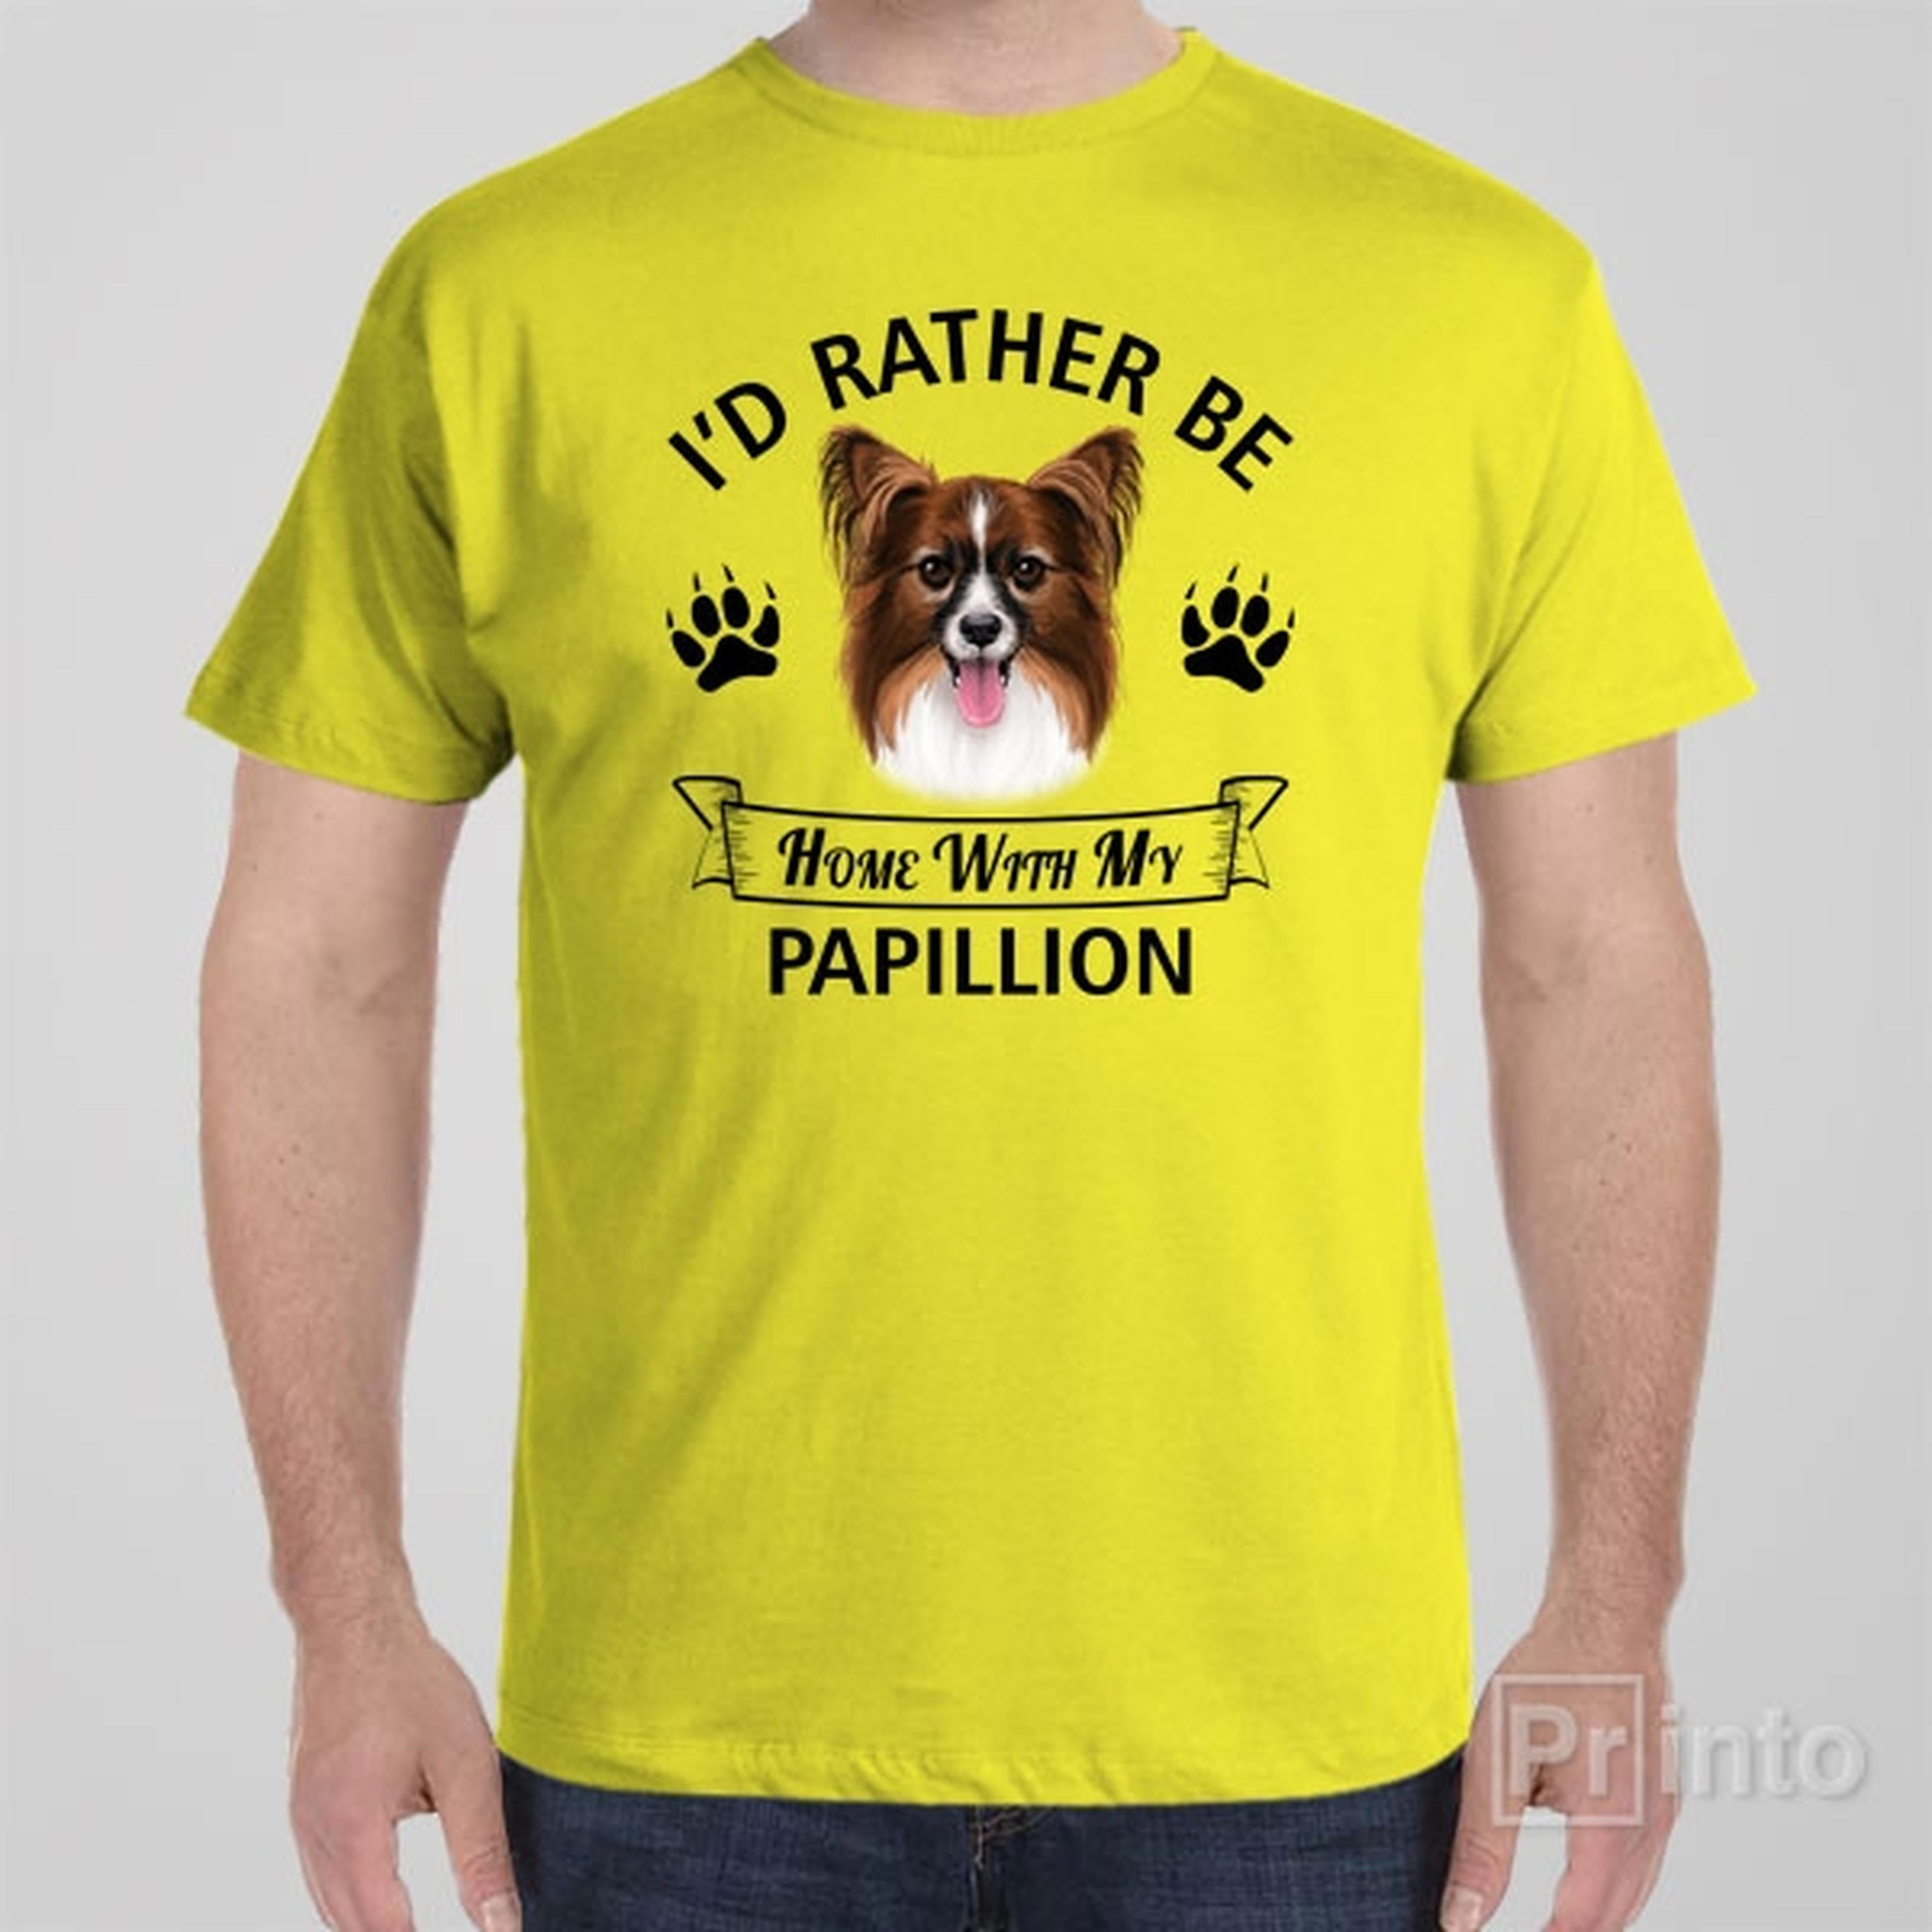 id-rather-stay-home-with-my-papillion-t-shirt